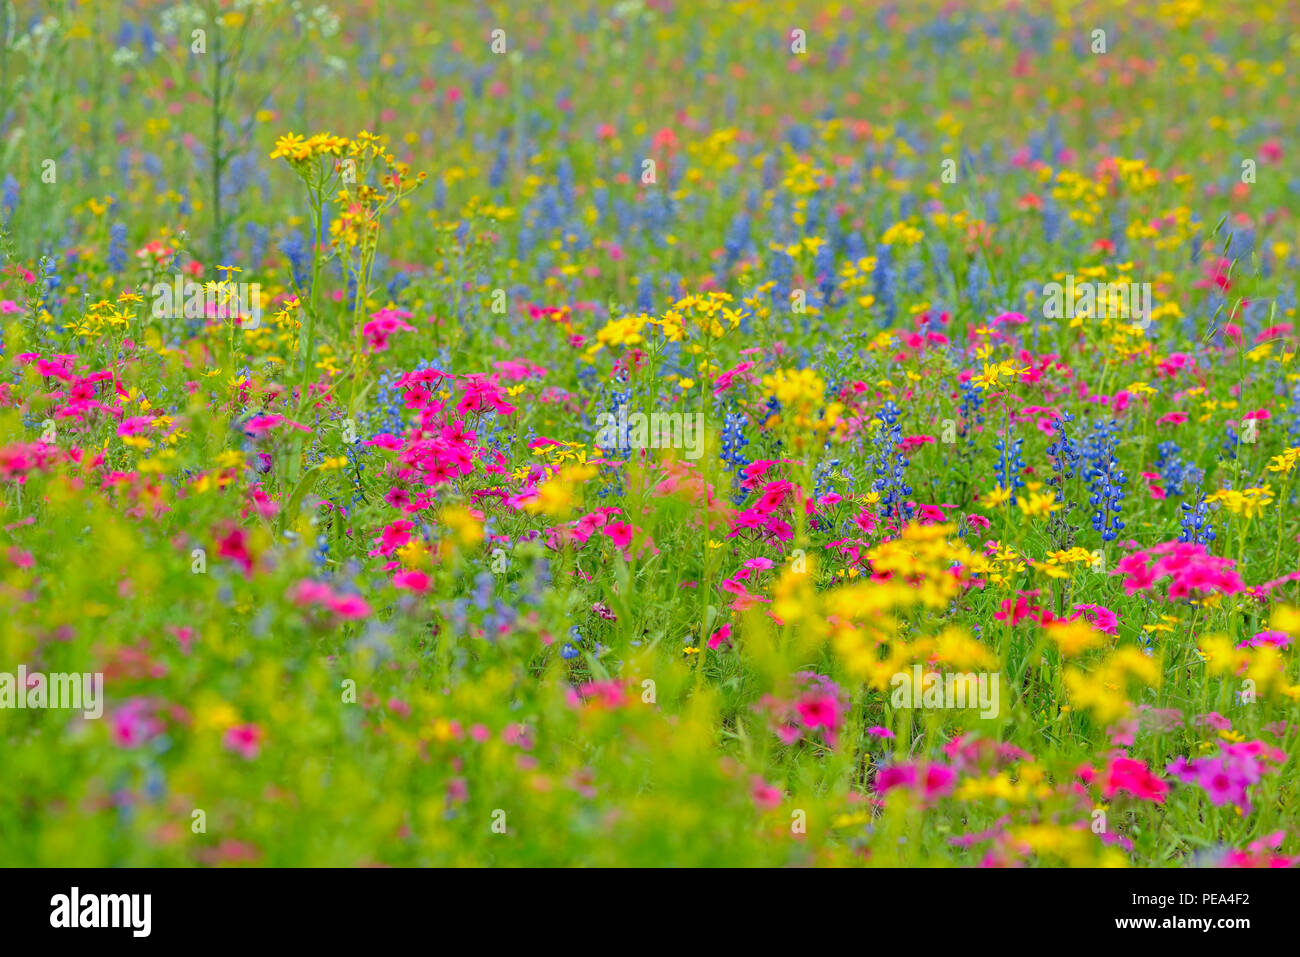 Texas wildflowers in bloom- phlox, bluebonnets, paintbrush in a meadow, Seguin, Texas, USA Stock Photo